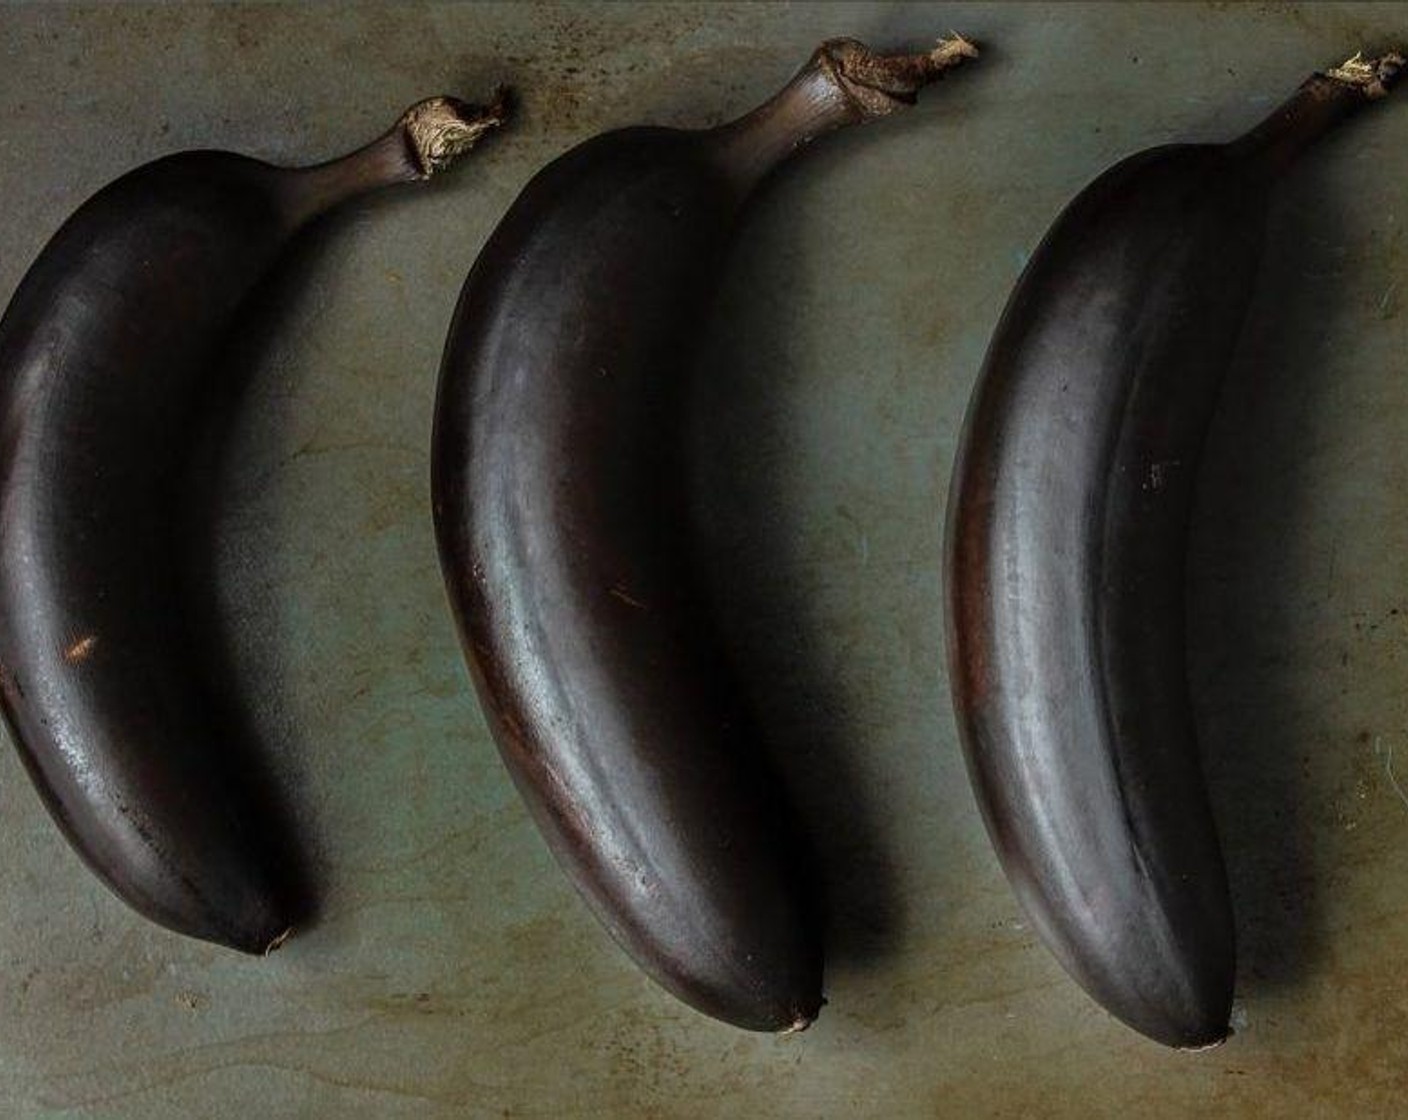 step 3 Bake it for 25-35 minutes. You will know it is done when the skins are black and very shiny and the bananas will look very plump. They occasionally will leak as well.